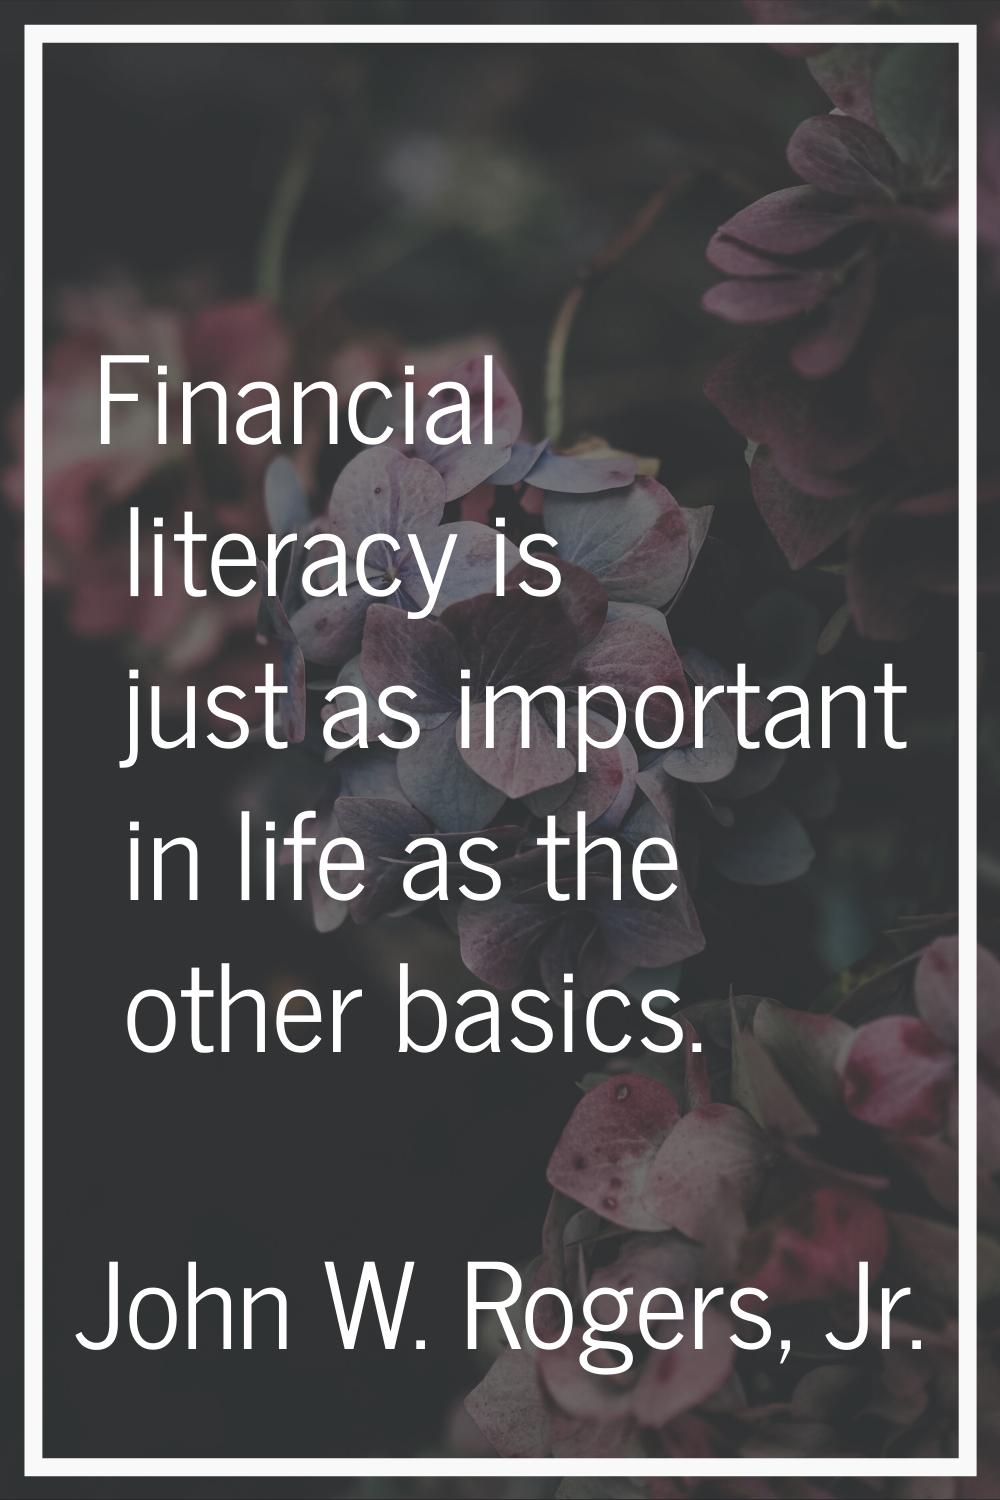 Financial literacy is just as important in life as the other basics.